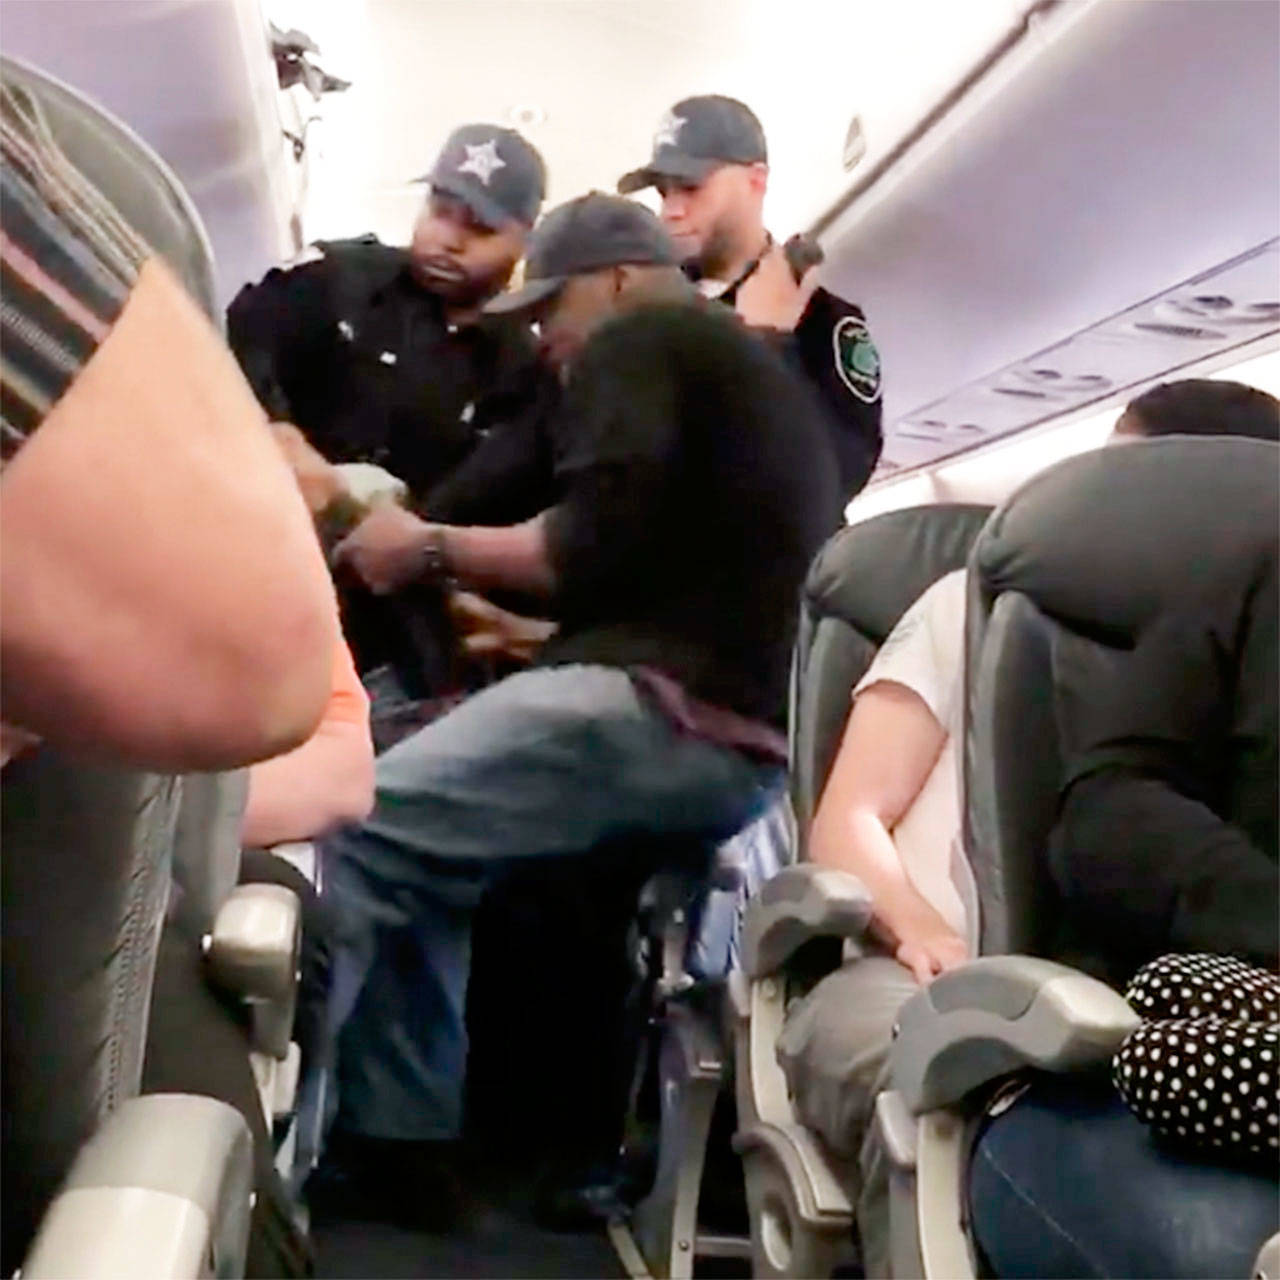 Police remove a passenger from a United Airlines flight in Chicago on April 9. (Audra D. Bridges via Facebook)